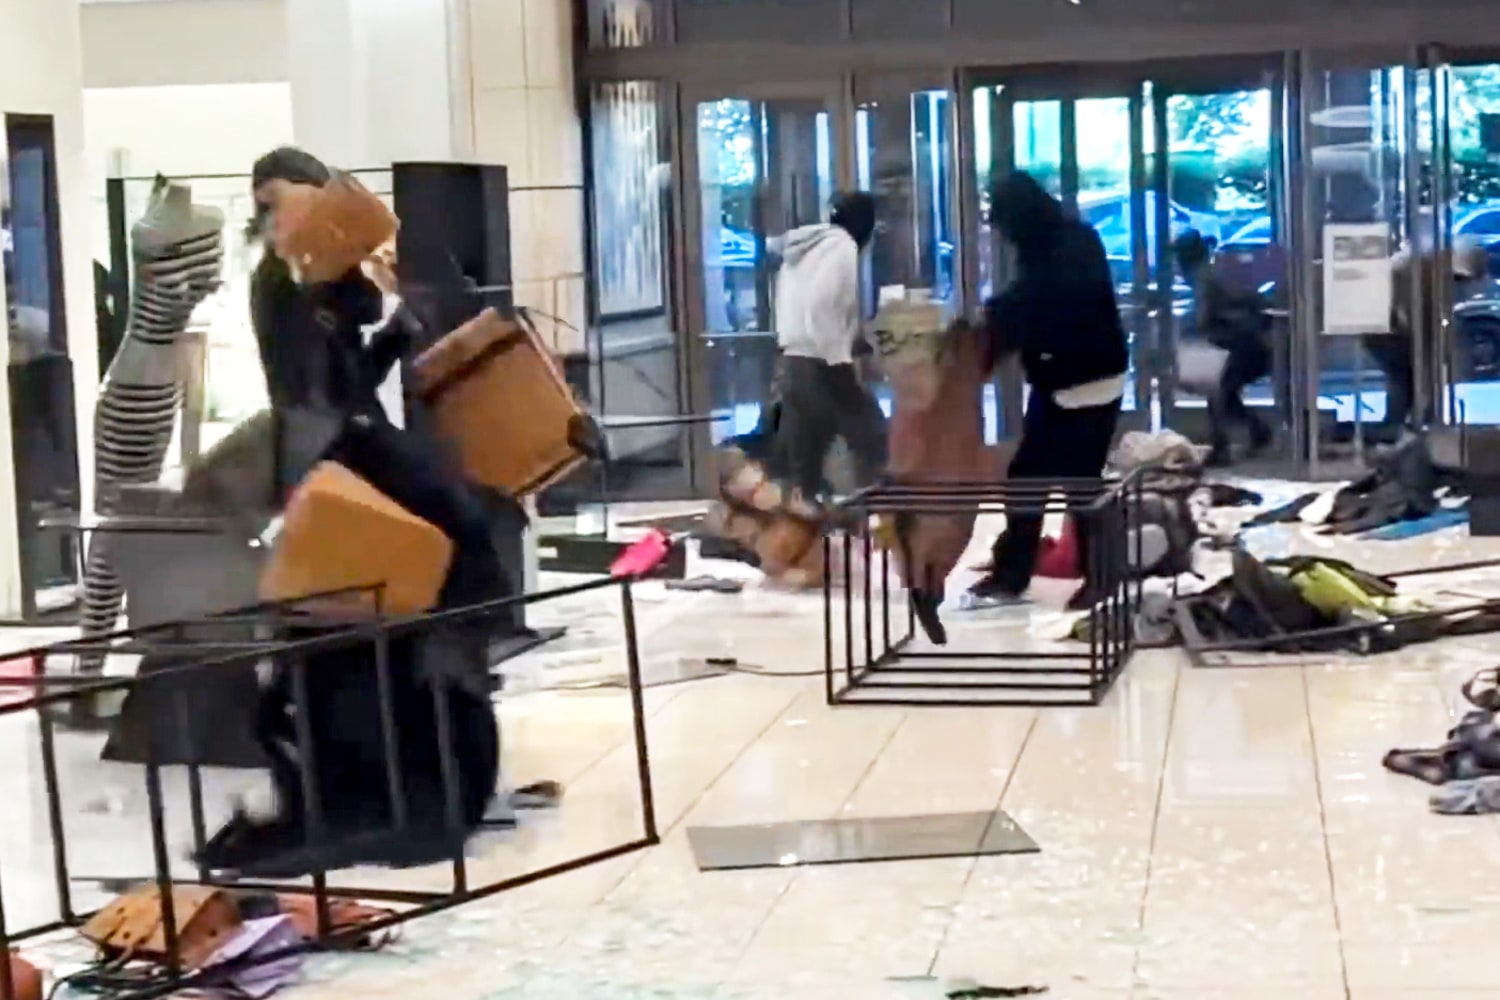 Luxury brands stores in San Francisco and Chicago hit by smash-and